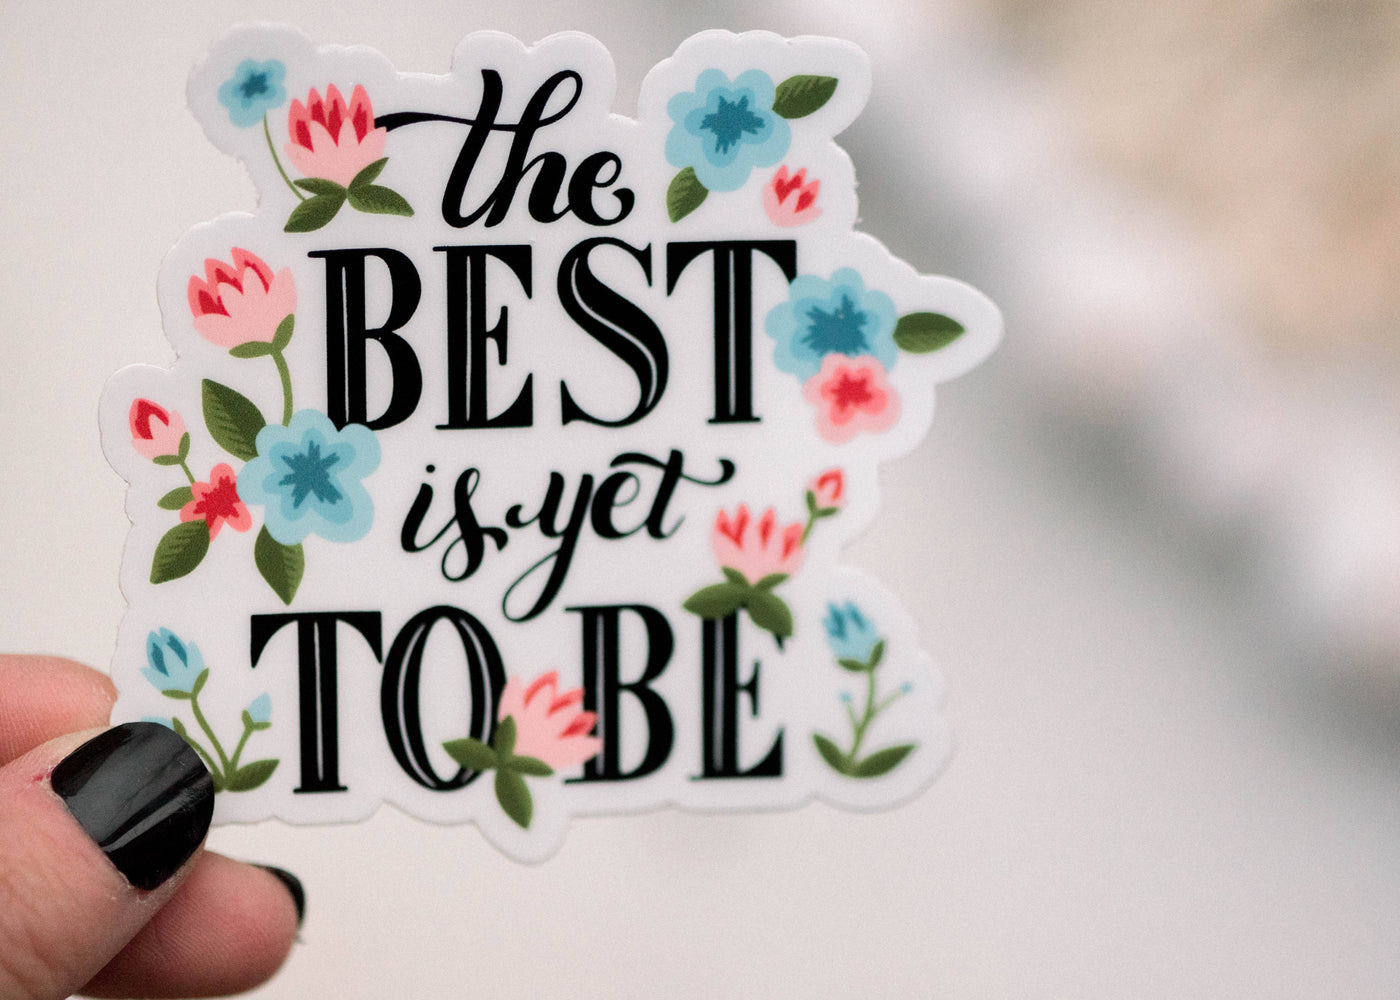 The Best Is Yet To Be, Vinyl Sticker, 3x3 in